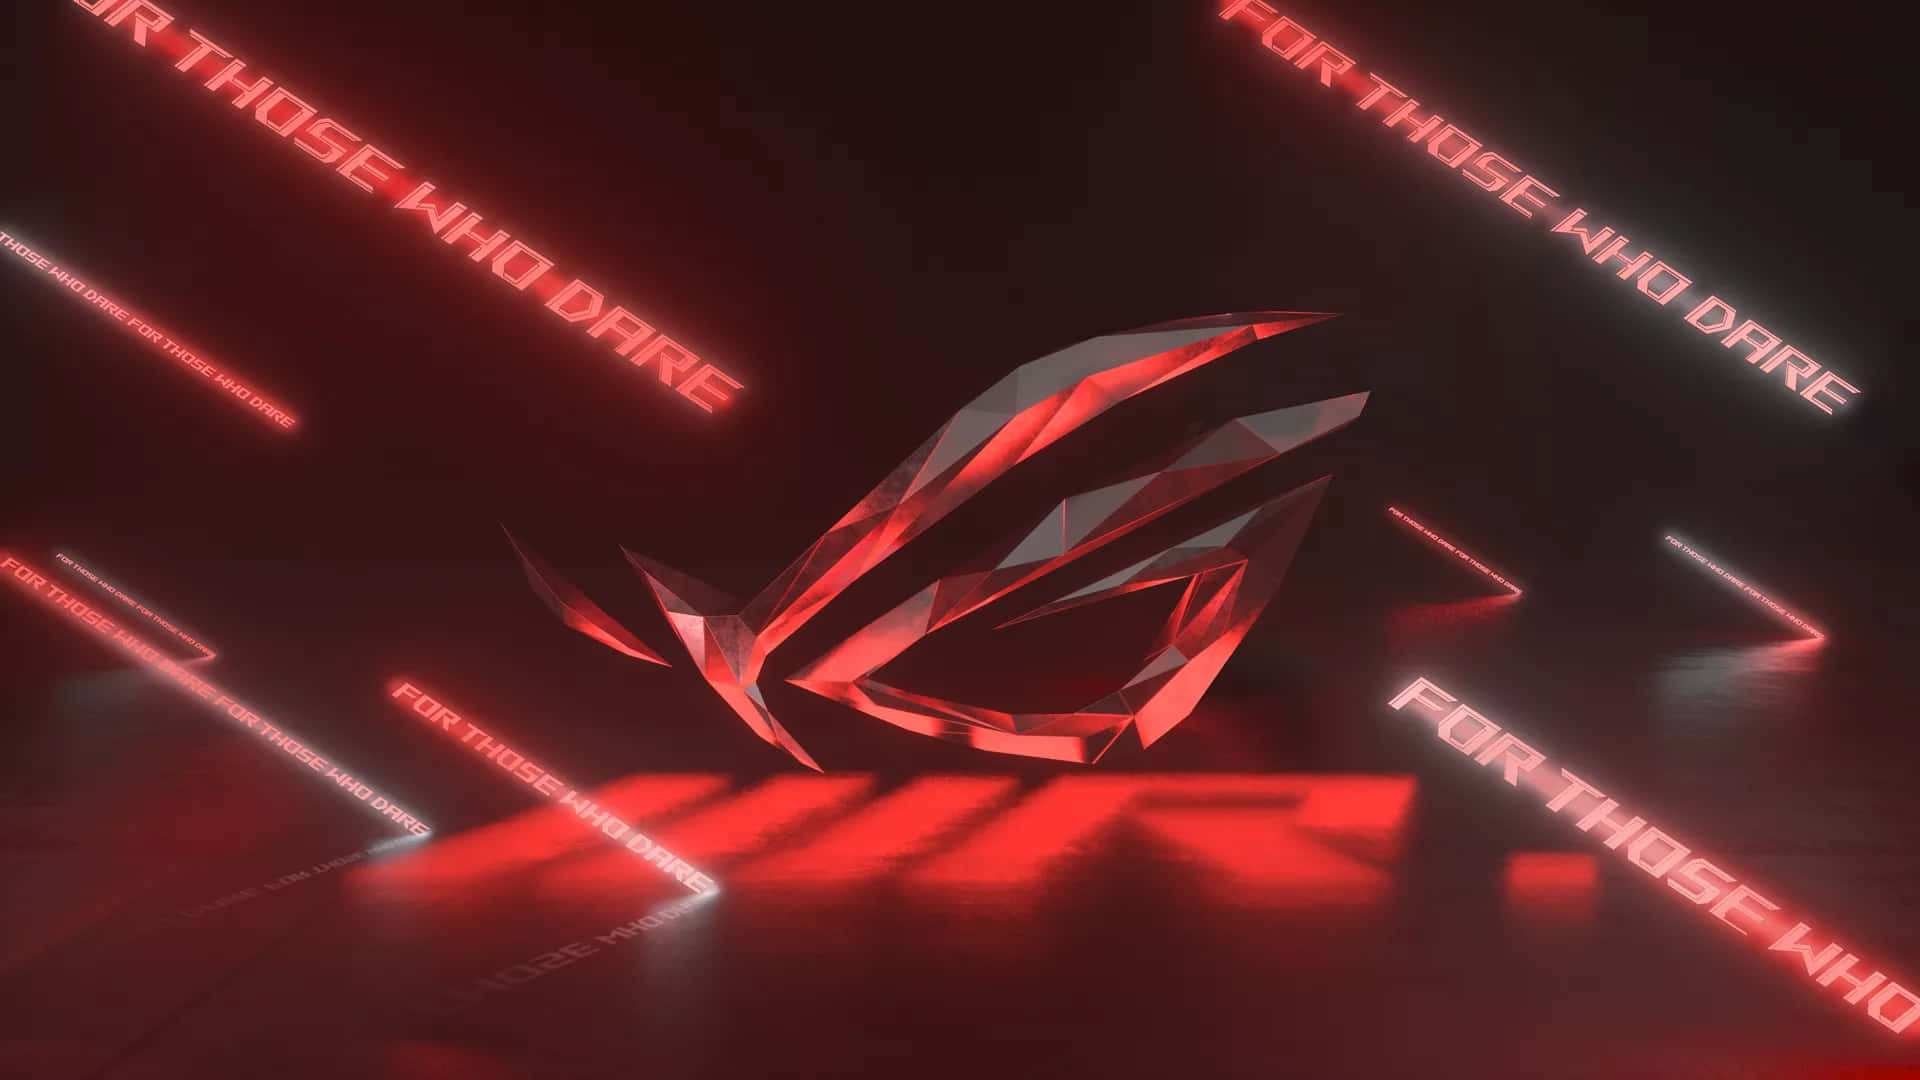 Asus Rog Logo In Red And Black